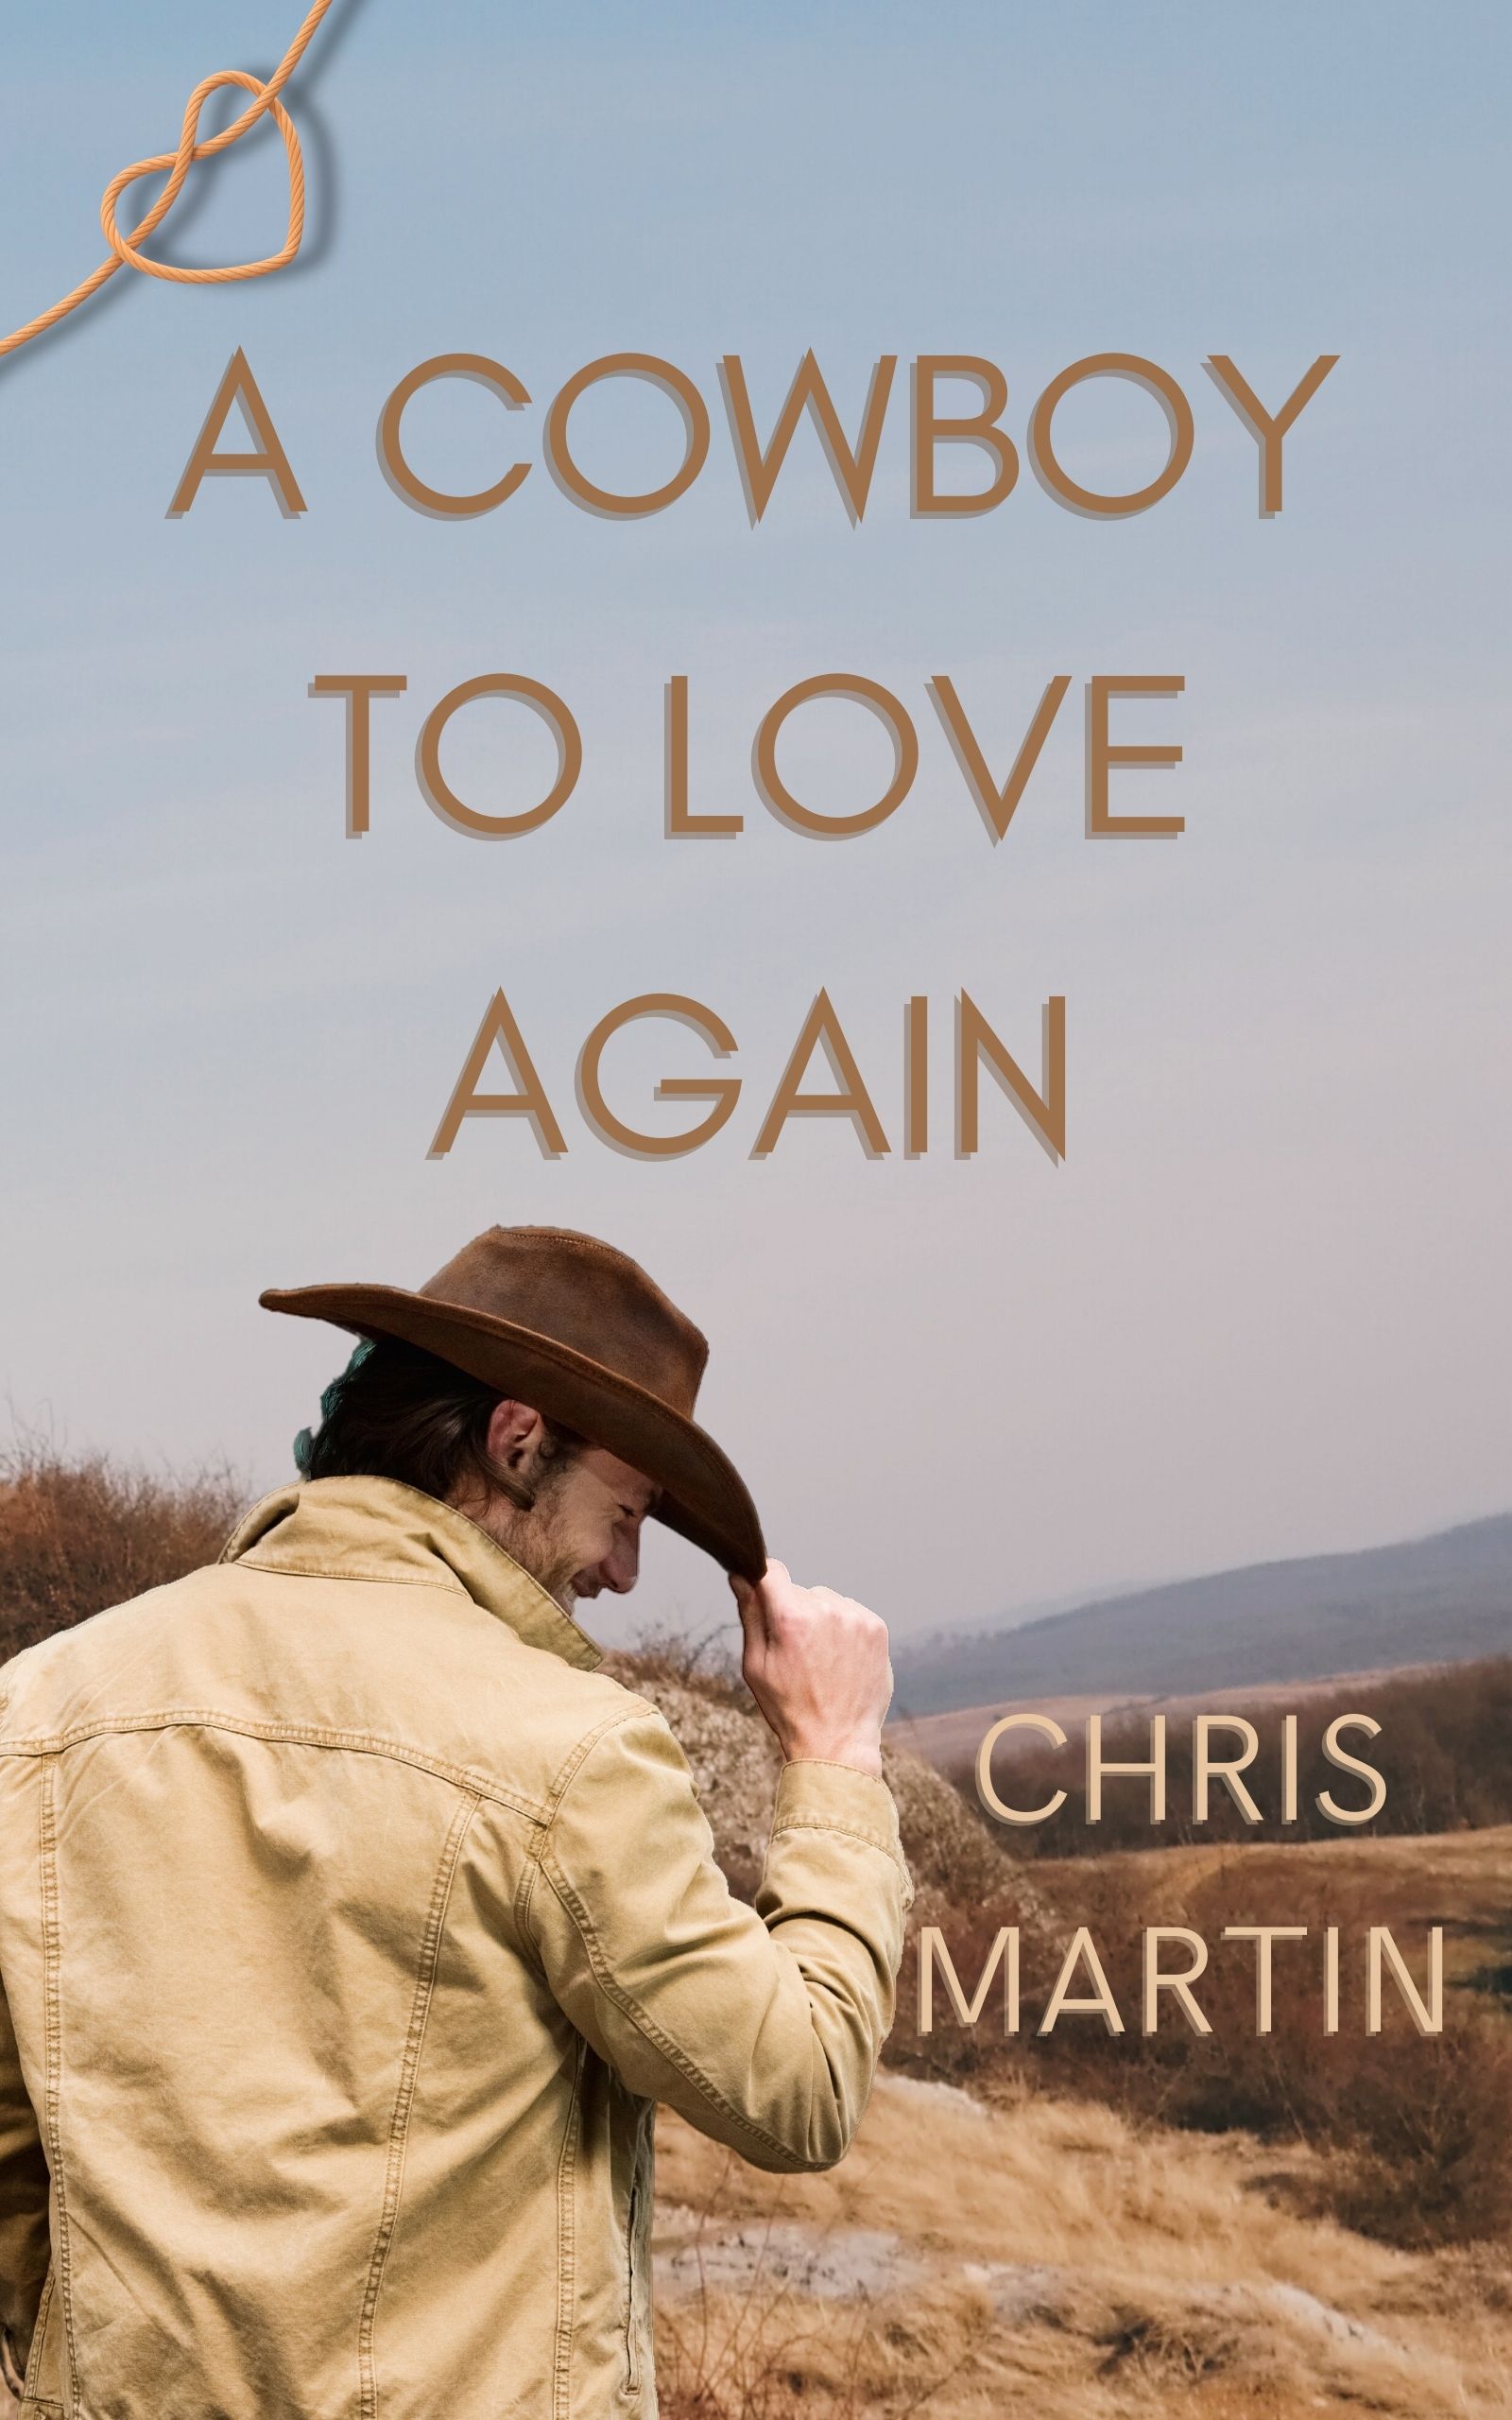 A Cowboy to Love Again by Chris Martin, book cover has man in western wear tipping cowboy hat